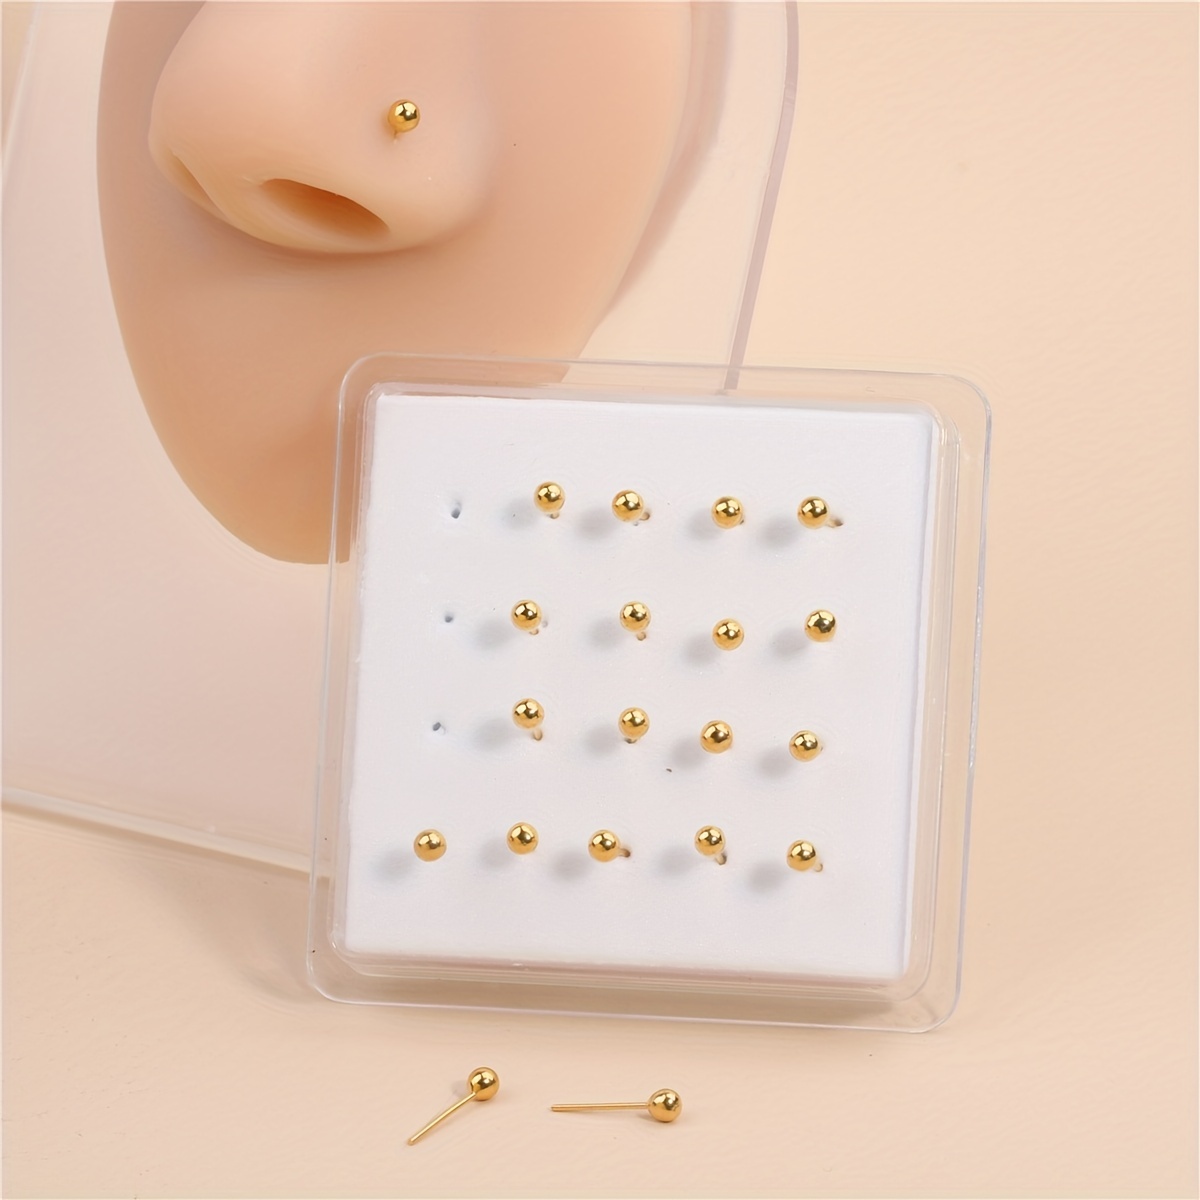 

3mm 20pcs Boxed Golden Nose Rings Set For Women Men Ball Straight Needle Body Piercing Jewelry